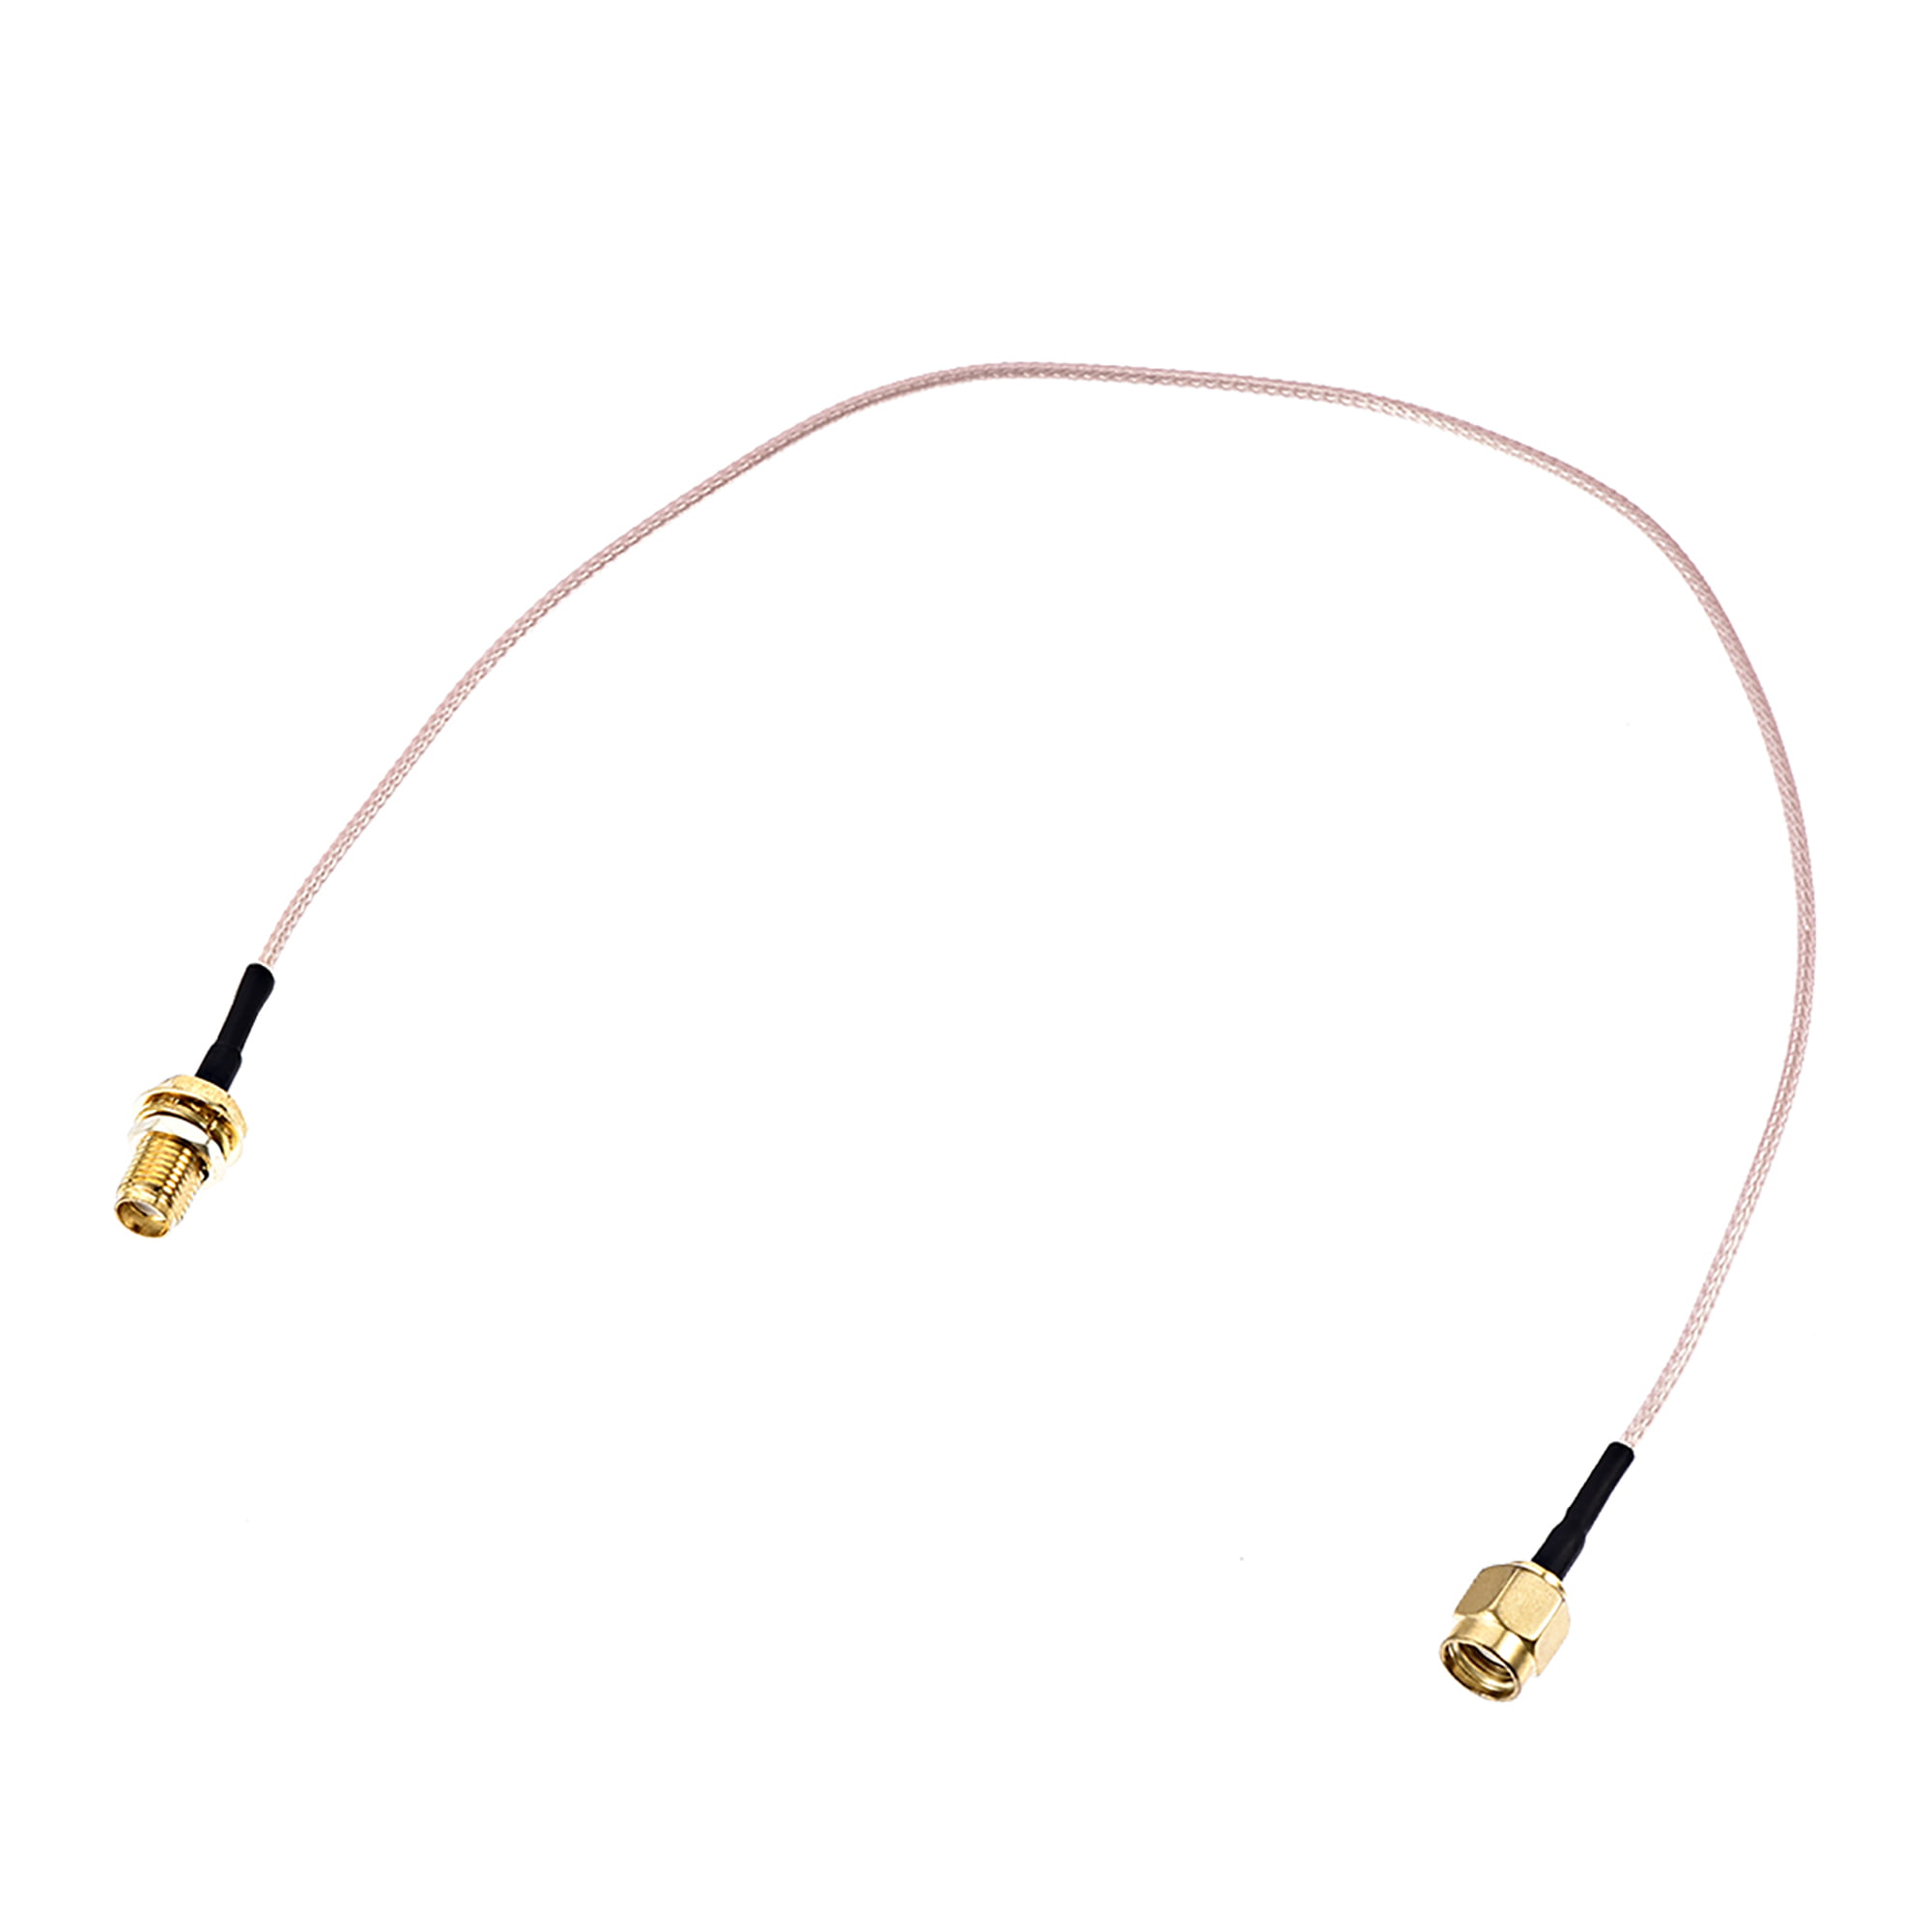 10m 33ft Low Loss RP-SMA Male to RP-SMA Female RG58/U Coaxial Cable Pigtail 